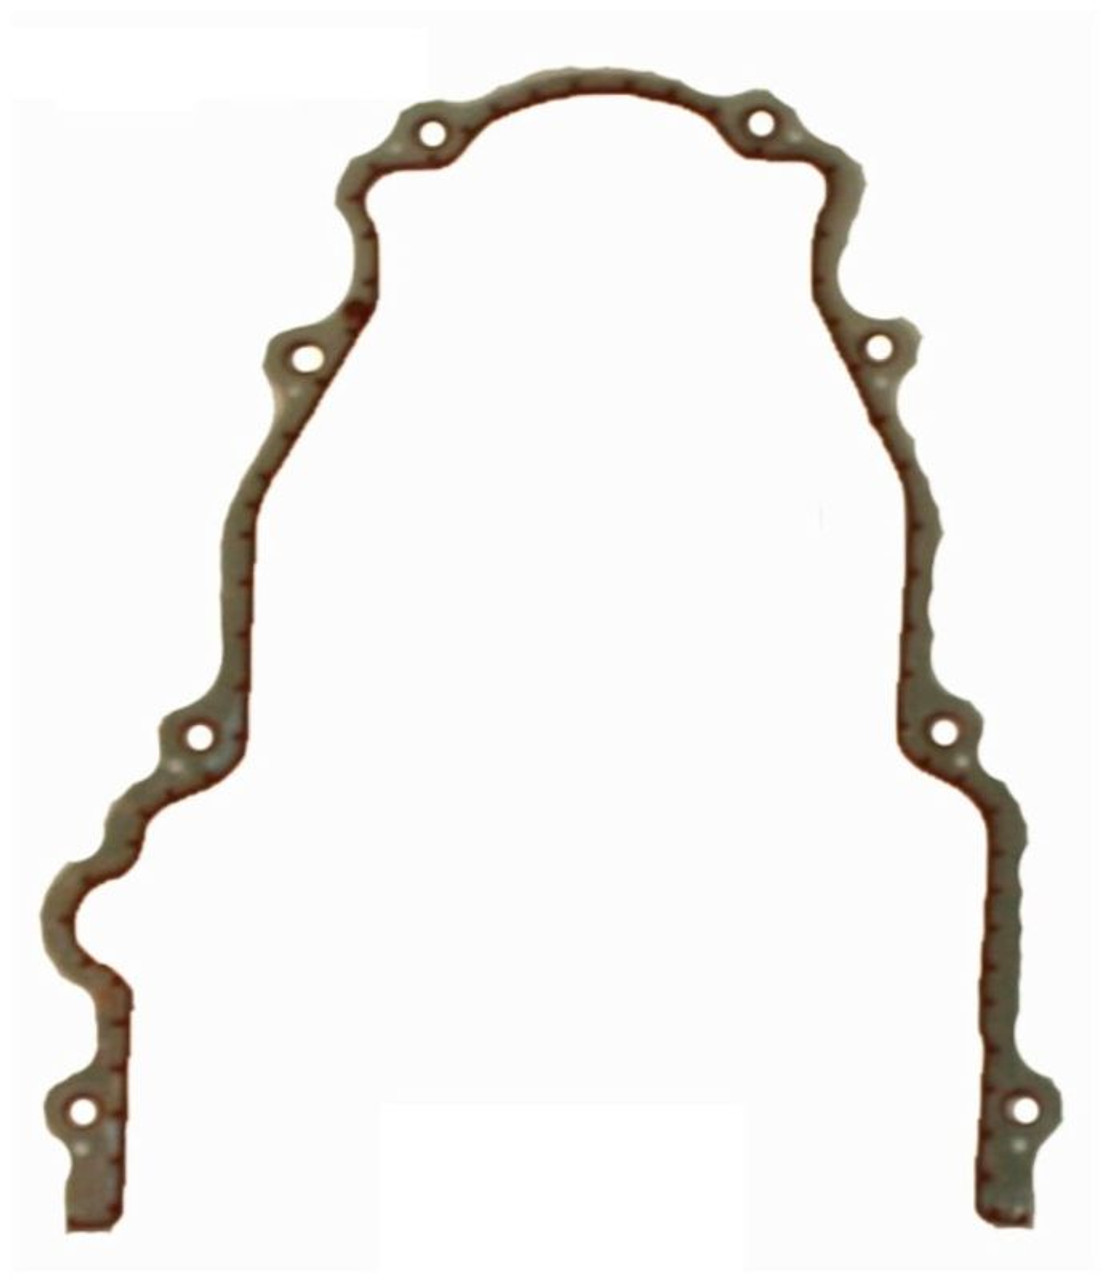 2010 Hummer H3 5.3L Engine Timing Cover Gasket TCG293-A -694